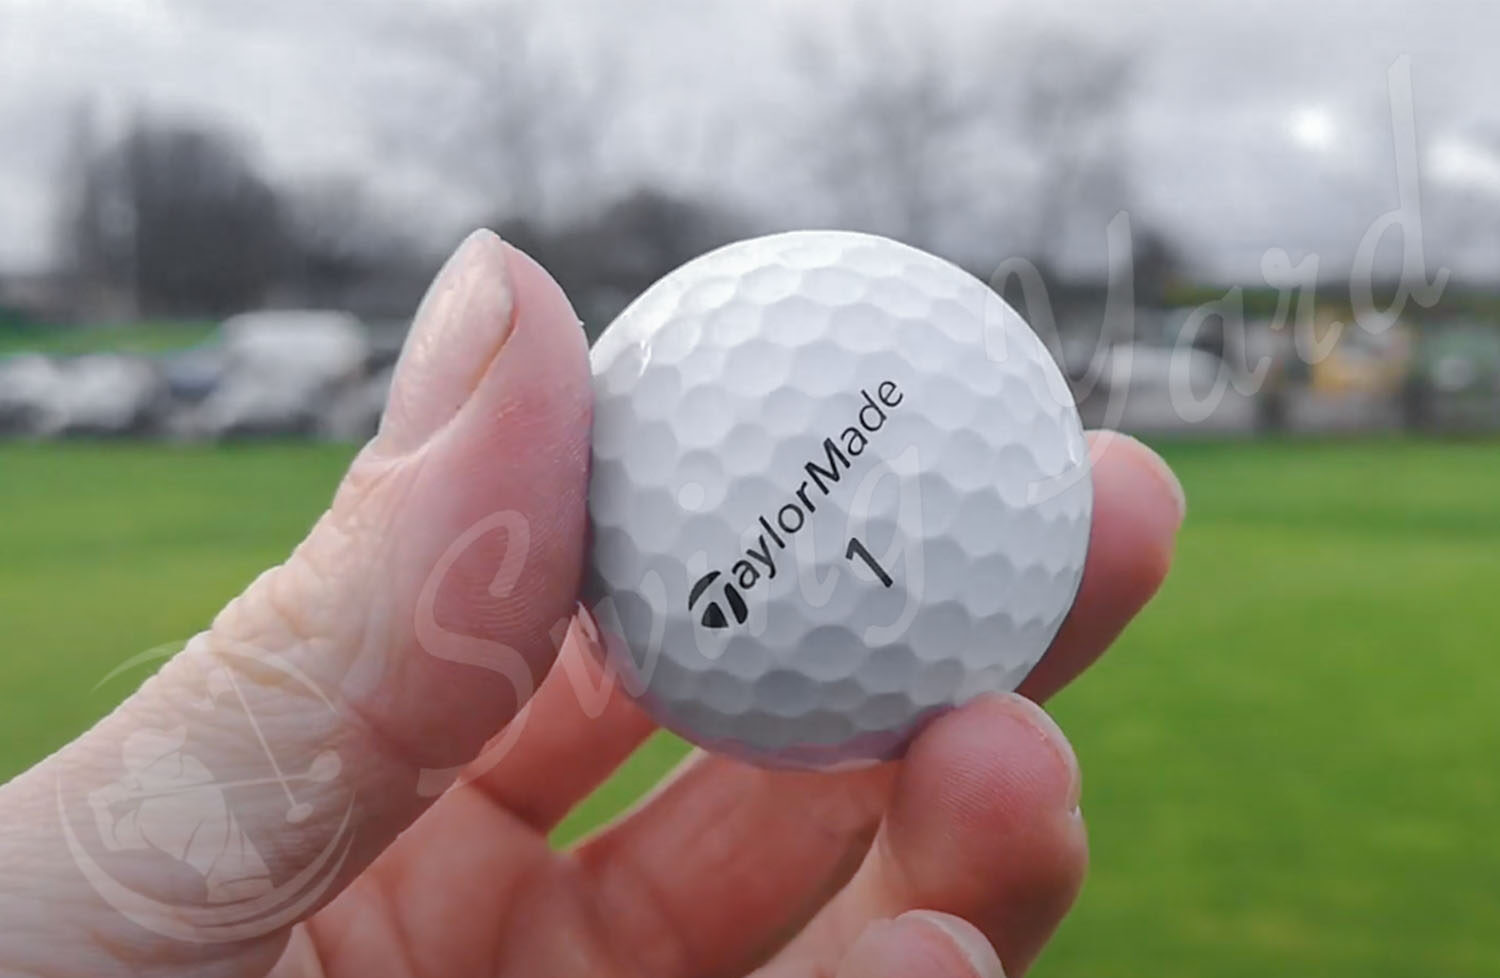 A number 1 TaylorMade Soft Response ball for testing